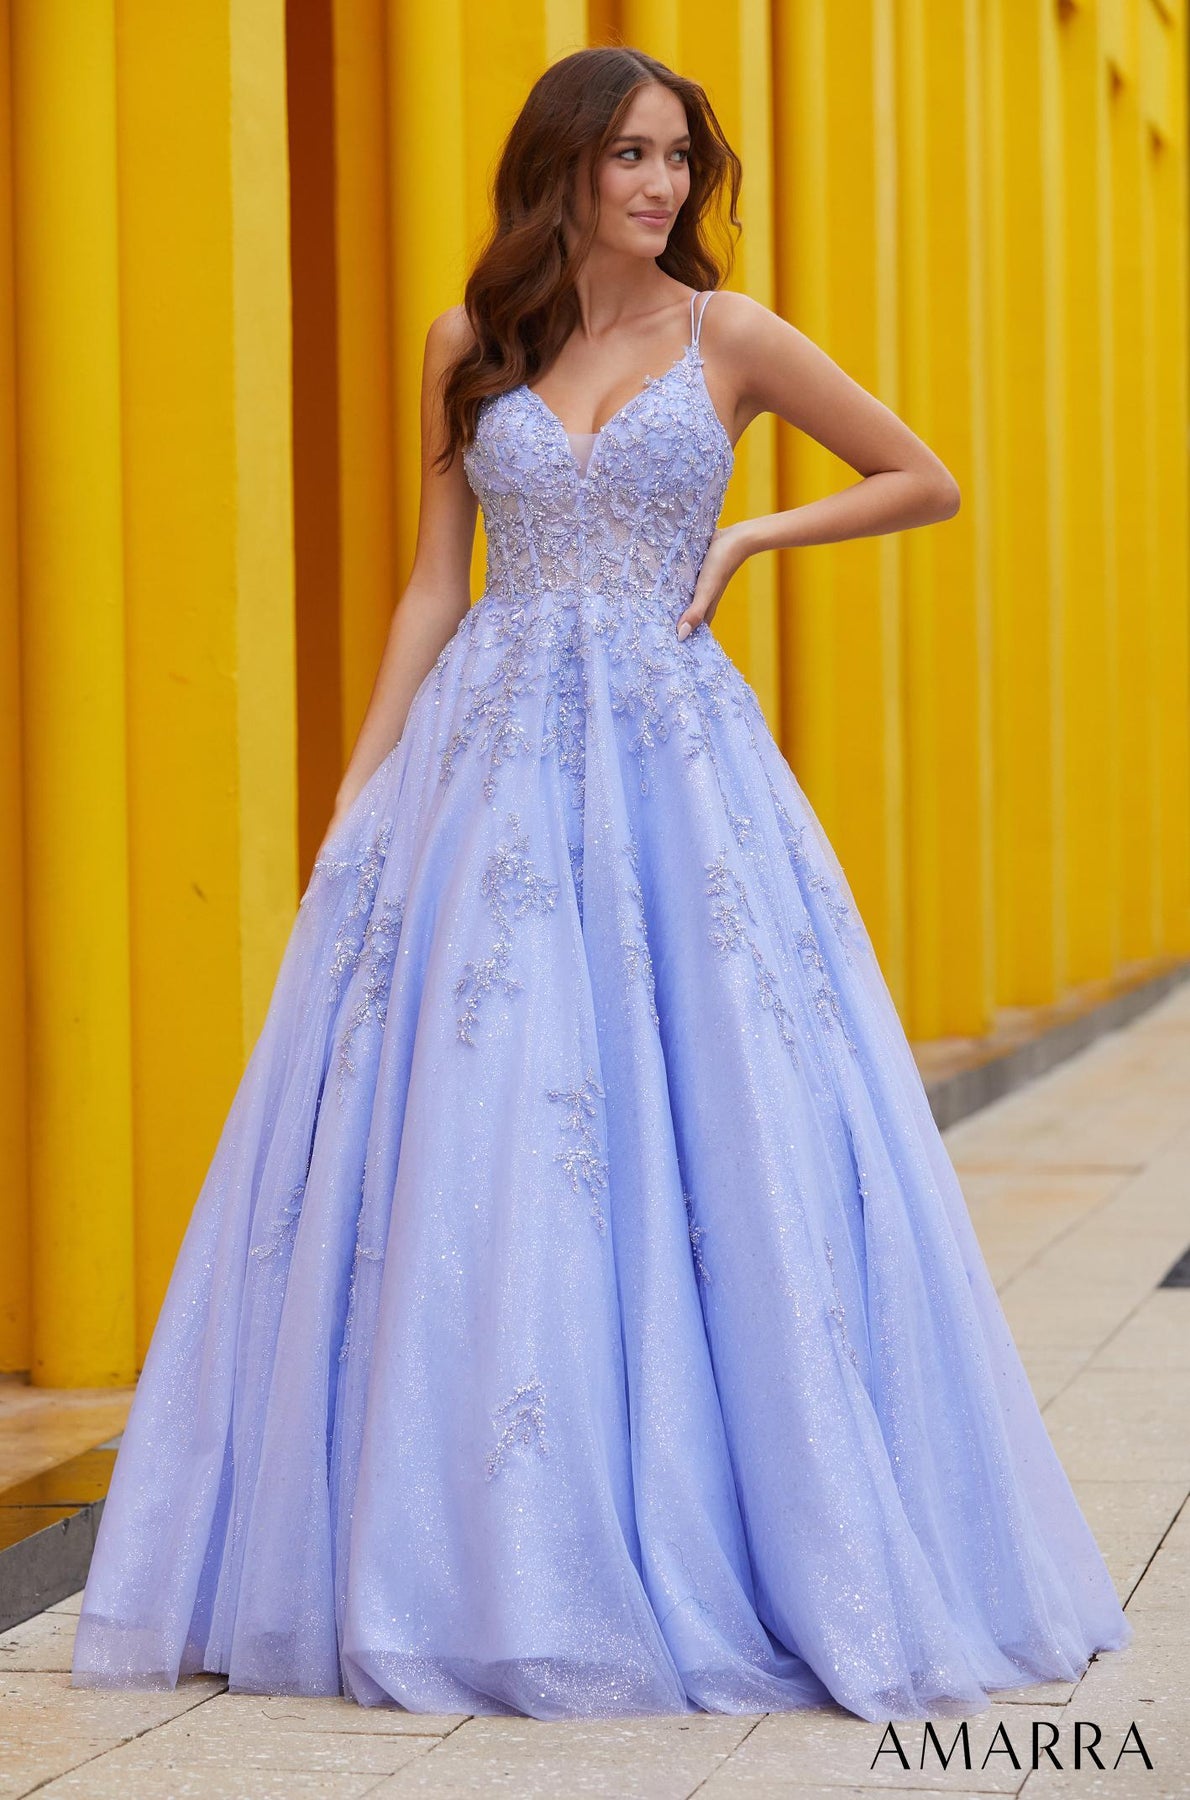 Blue Tulle Sequins Long Ball Gown Dress Formal Dress | Ball gown dresses, A  line prom dresses, Pretty prom dresses